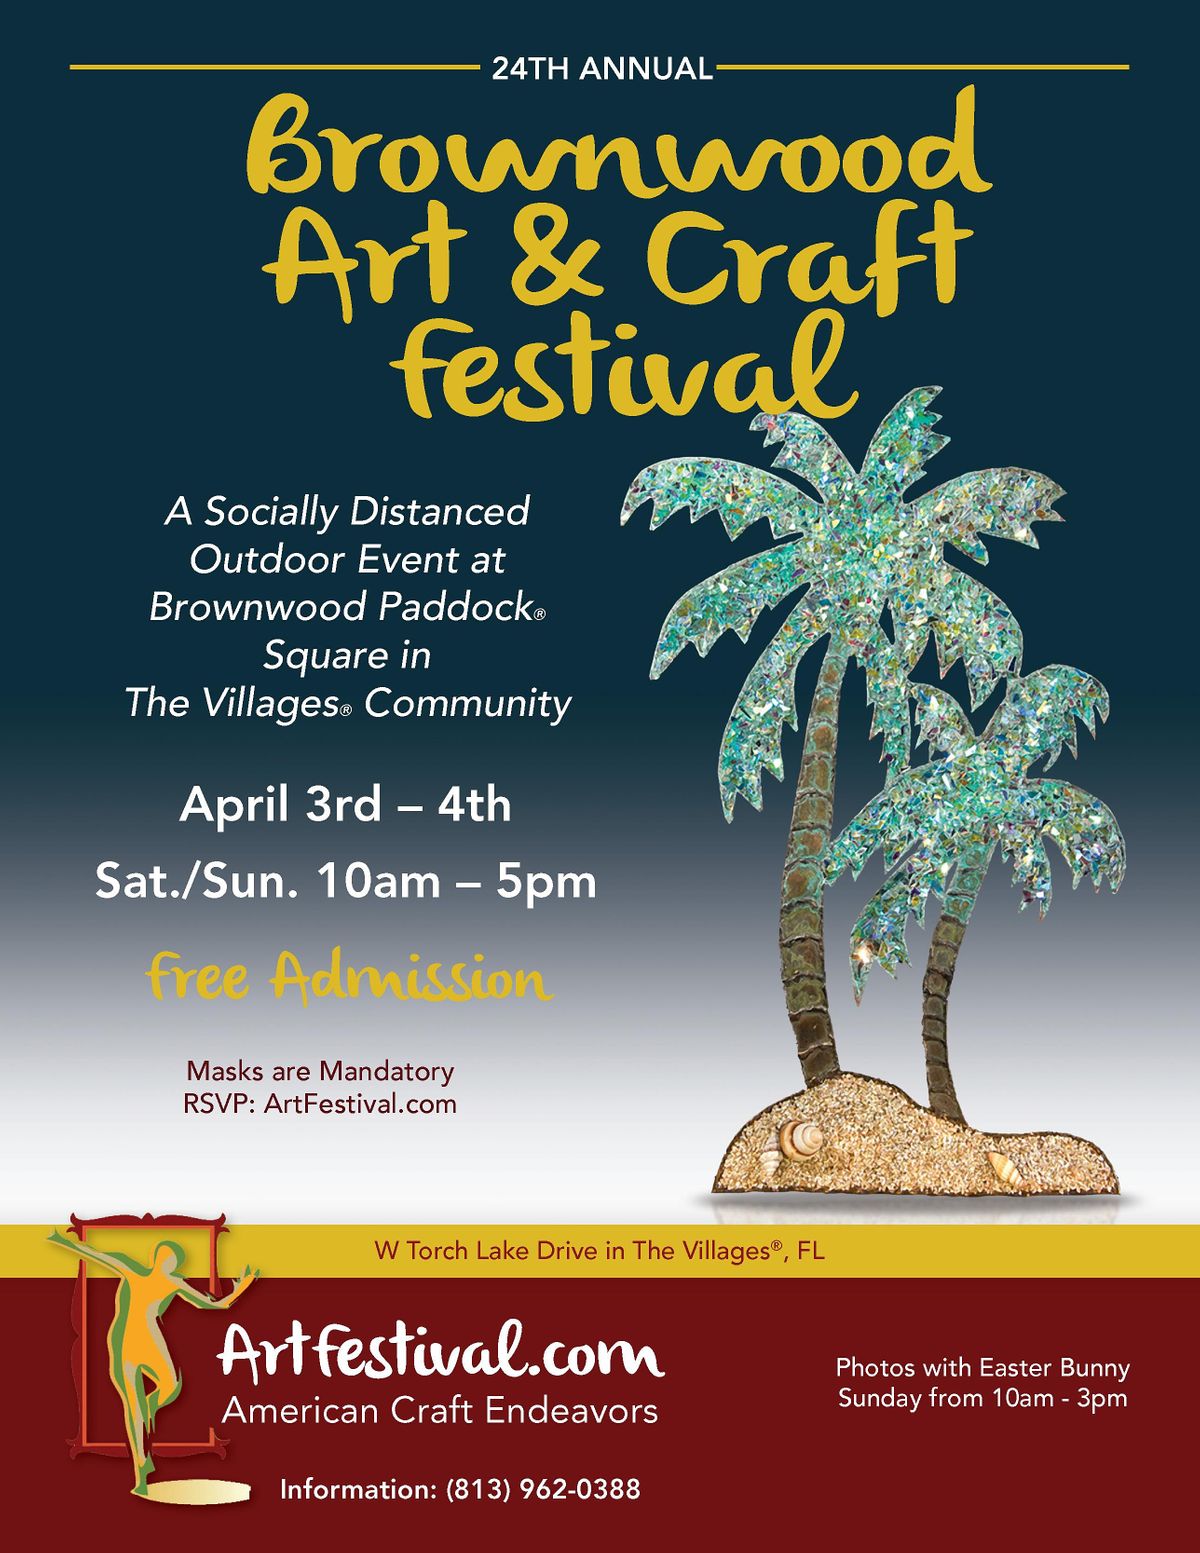 24th Annual Art & Craft Festival at Brownwood, Brownwood Paddock Square